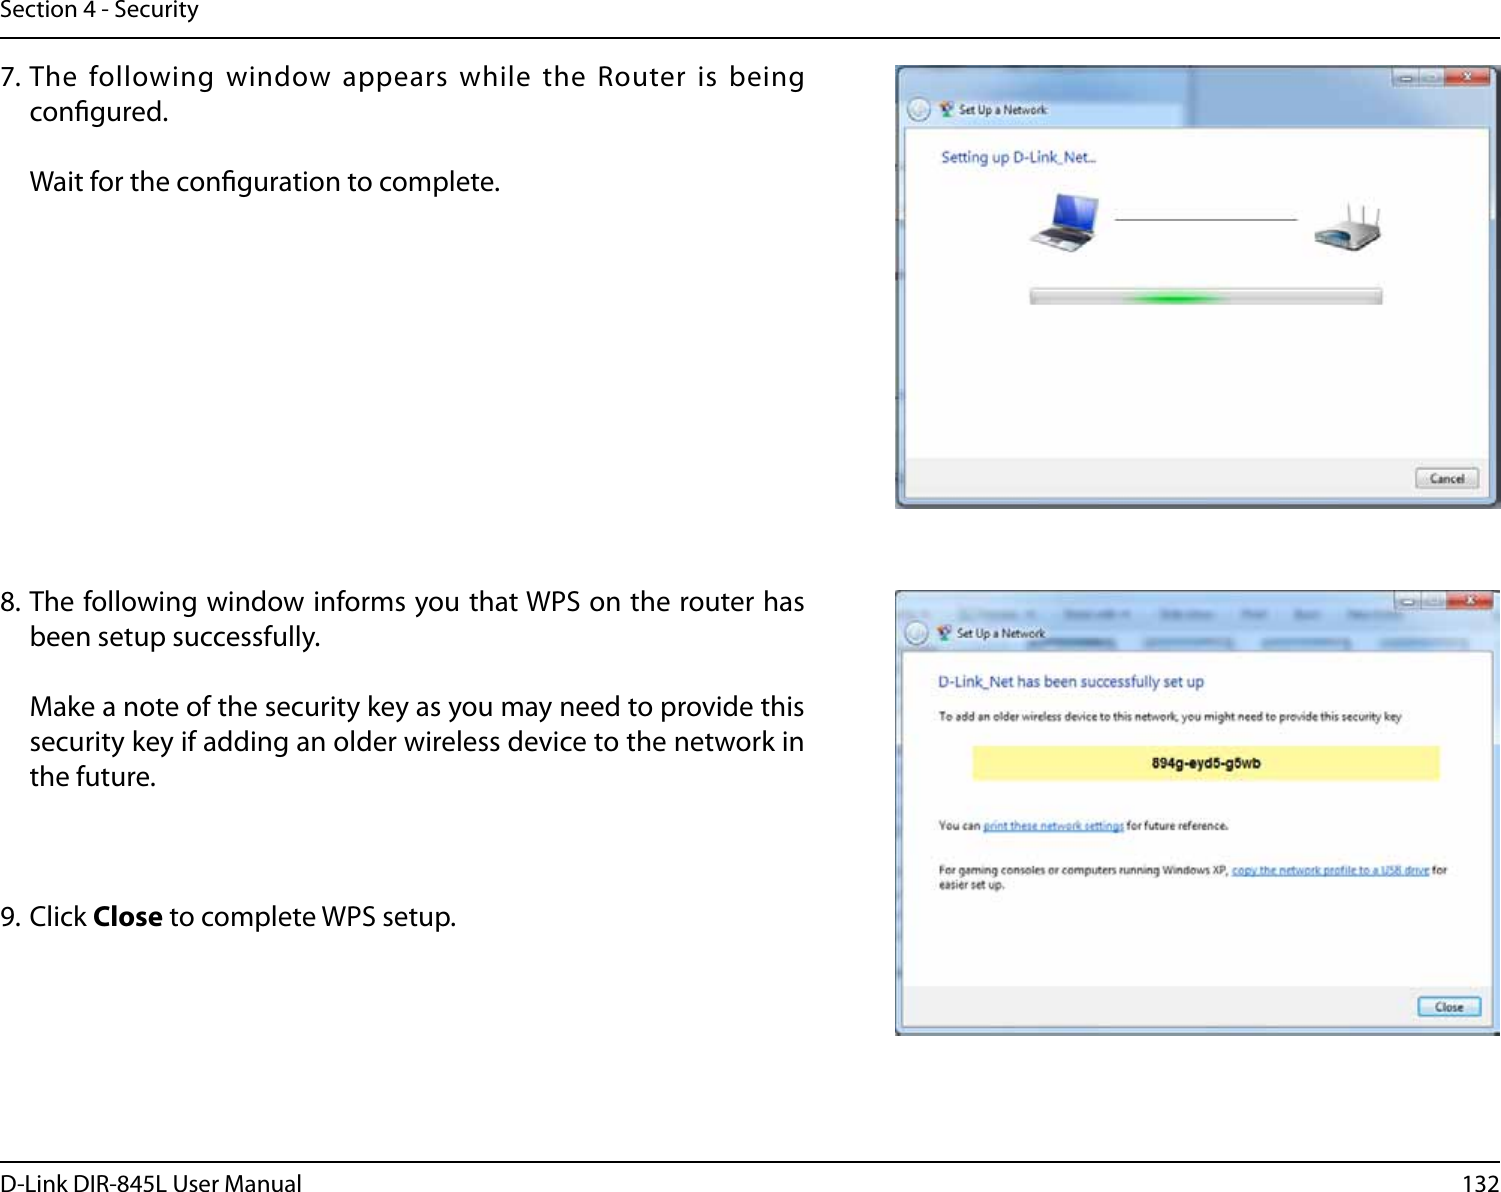 132D-Link DIR-845L User ManualSection 4 - Security7. The following window appears while  the Router is being congured.   Wait for the conguration to complete.8. The following window informs you that WPS on the router has been setup successfully.  Make a note of the security key as you may need to provide this security key if adding an older wireless device to the network in the future.9. Click Close to complete WPS setup.